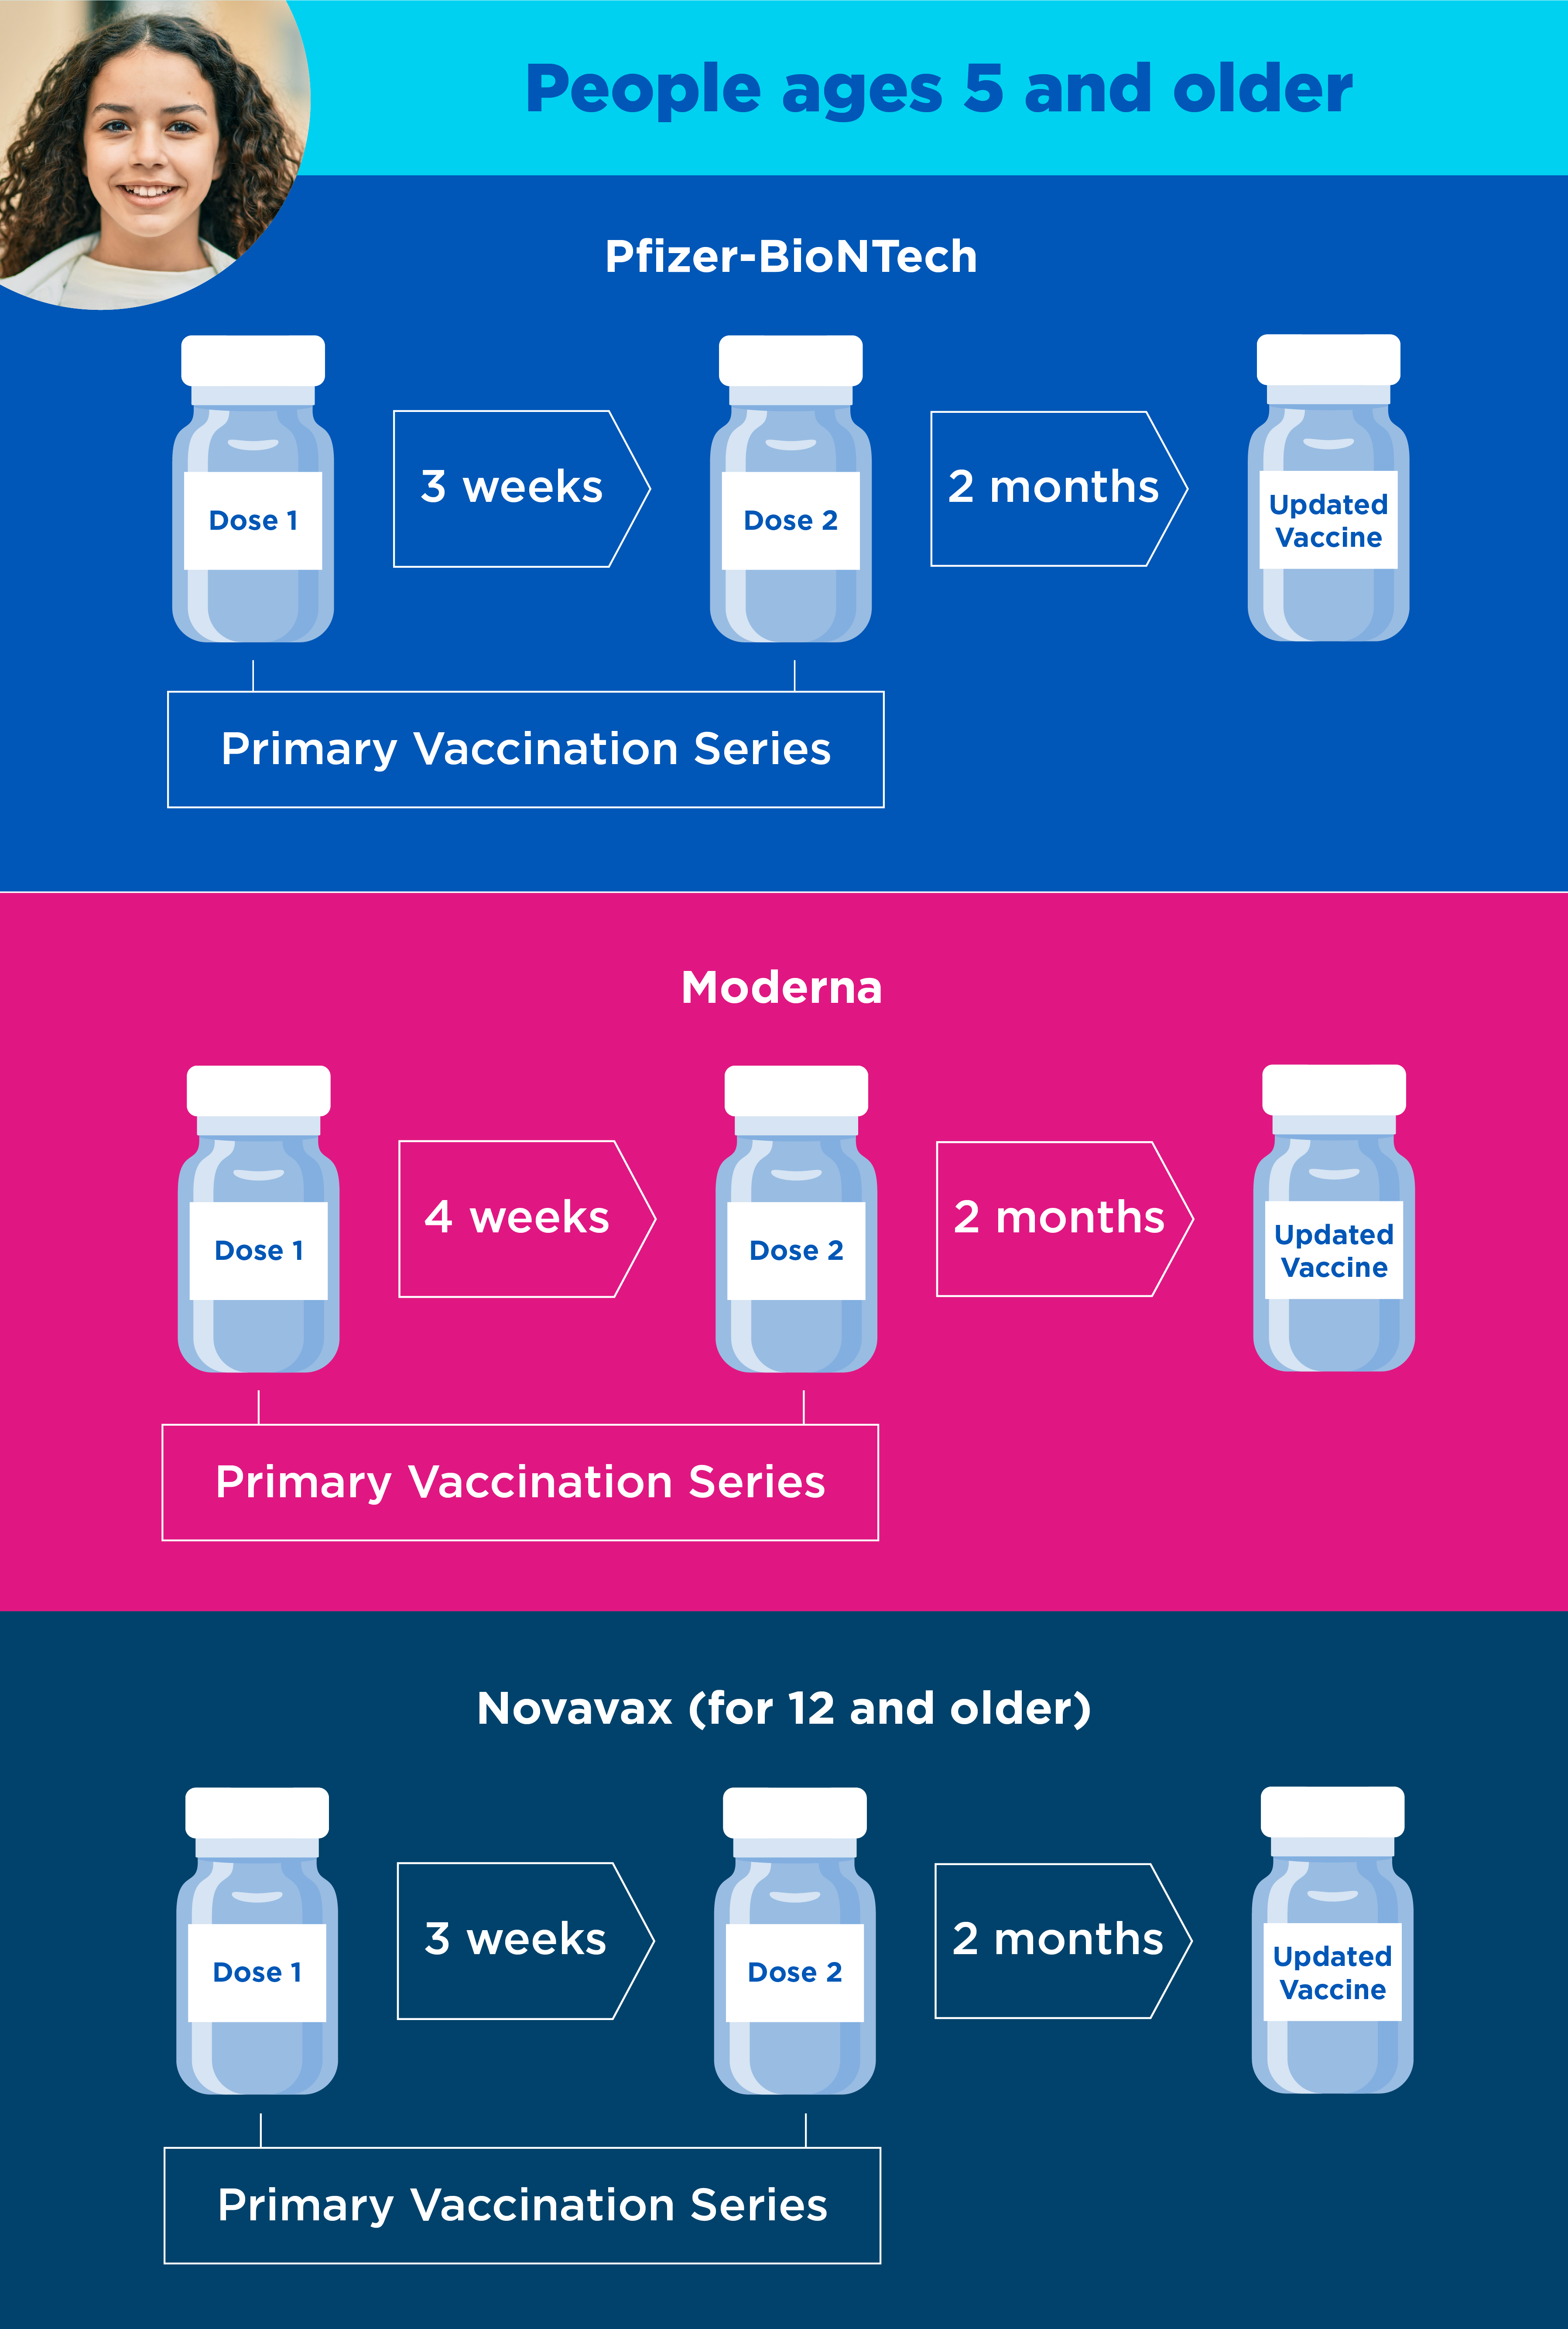 Vaccines and Doses Infographic 5 years+